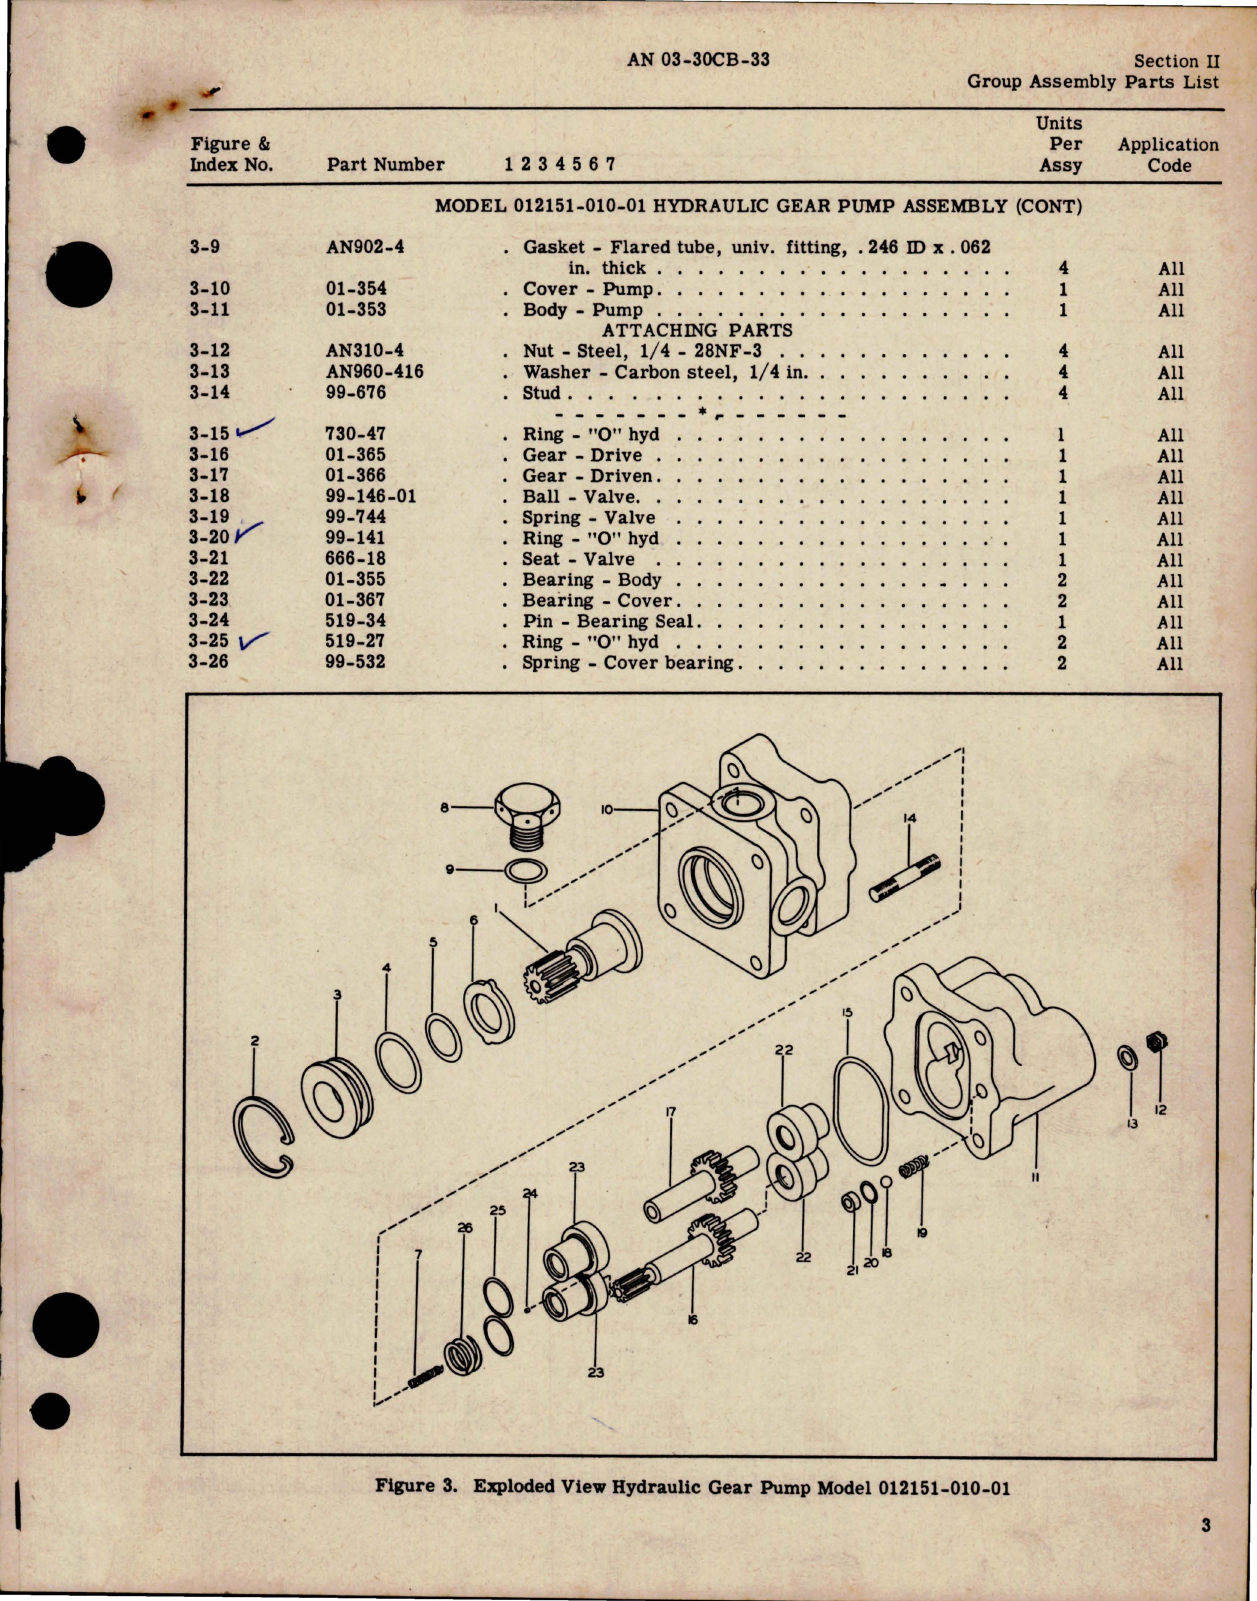 Sample page 5 from AirCorps Library document: Parts Catalog for Electric Motor Driven Hydraulic Pump - Model 112146-010-01 